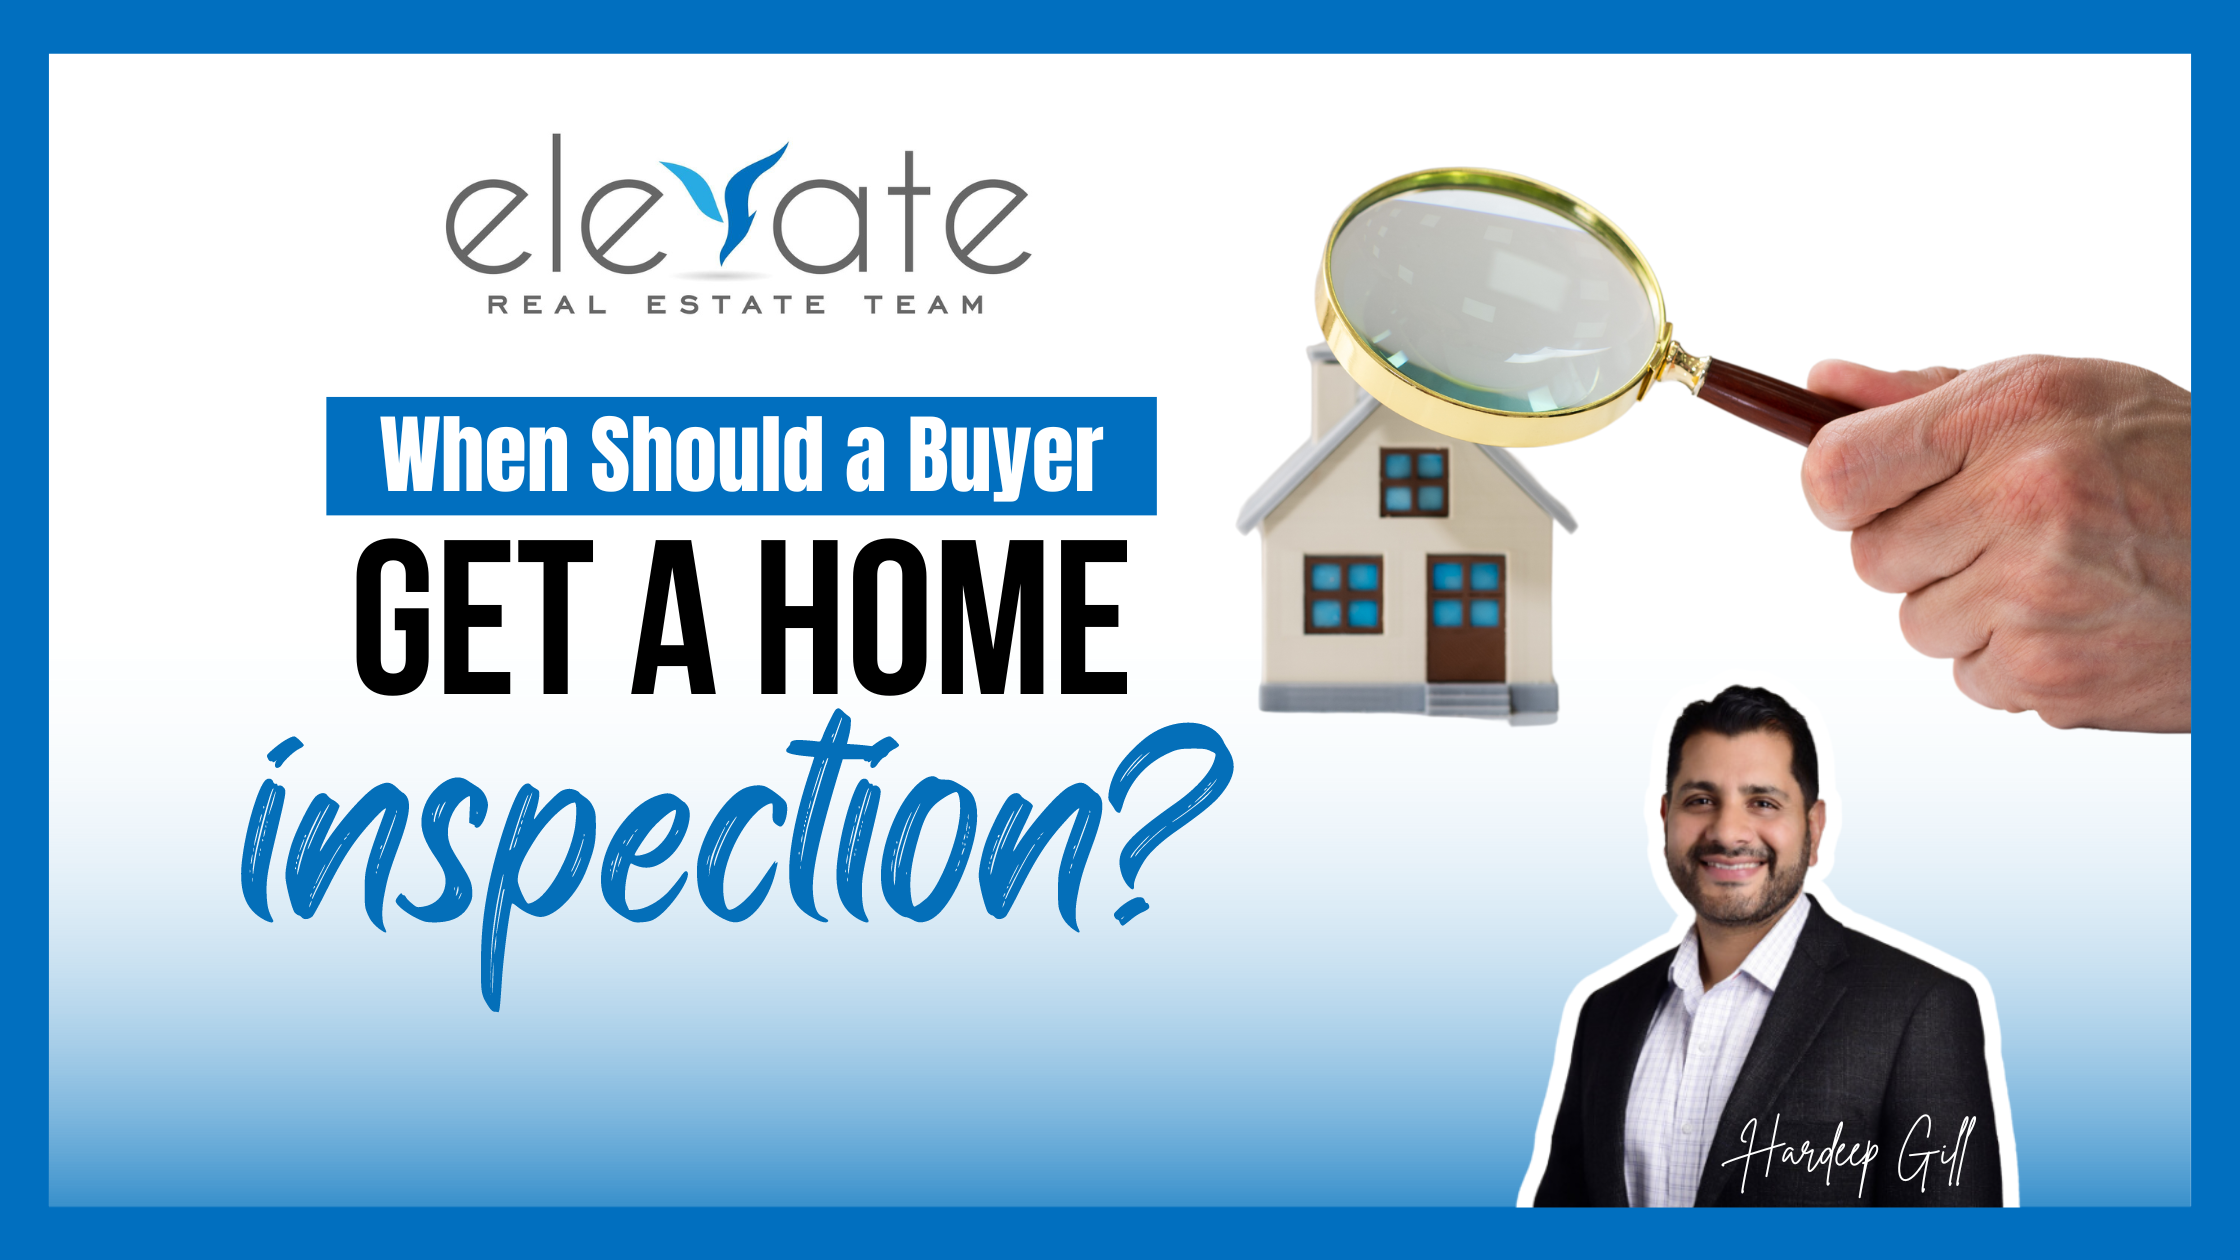 When Should a Buyer Get a Home Inspection?